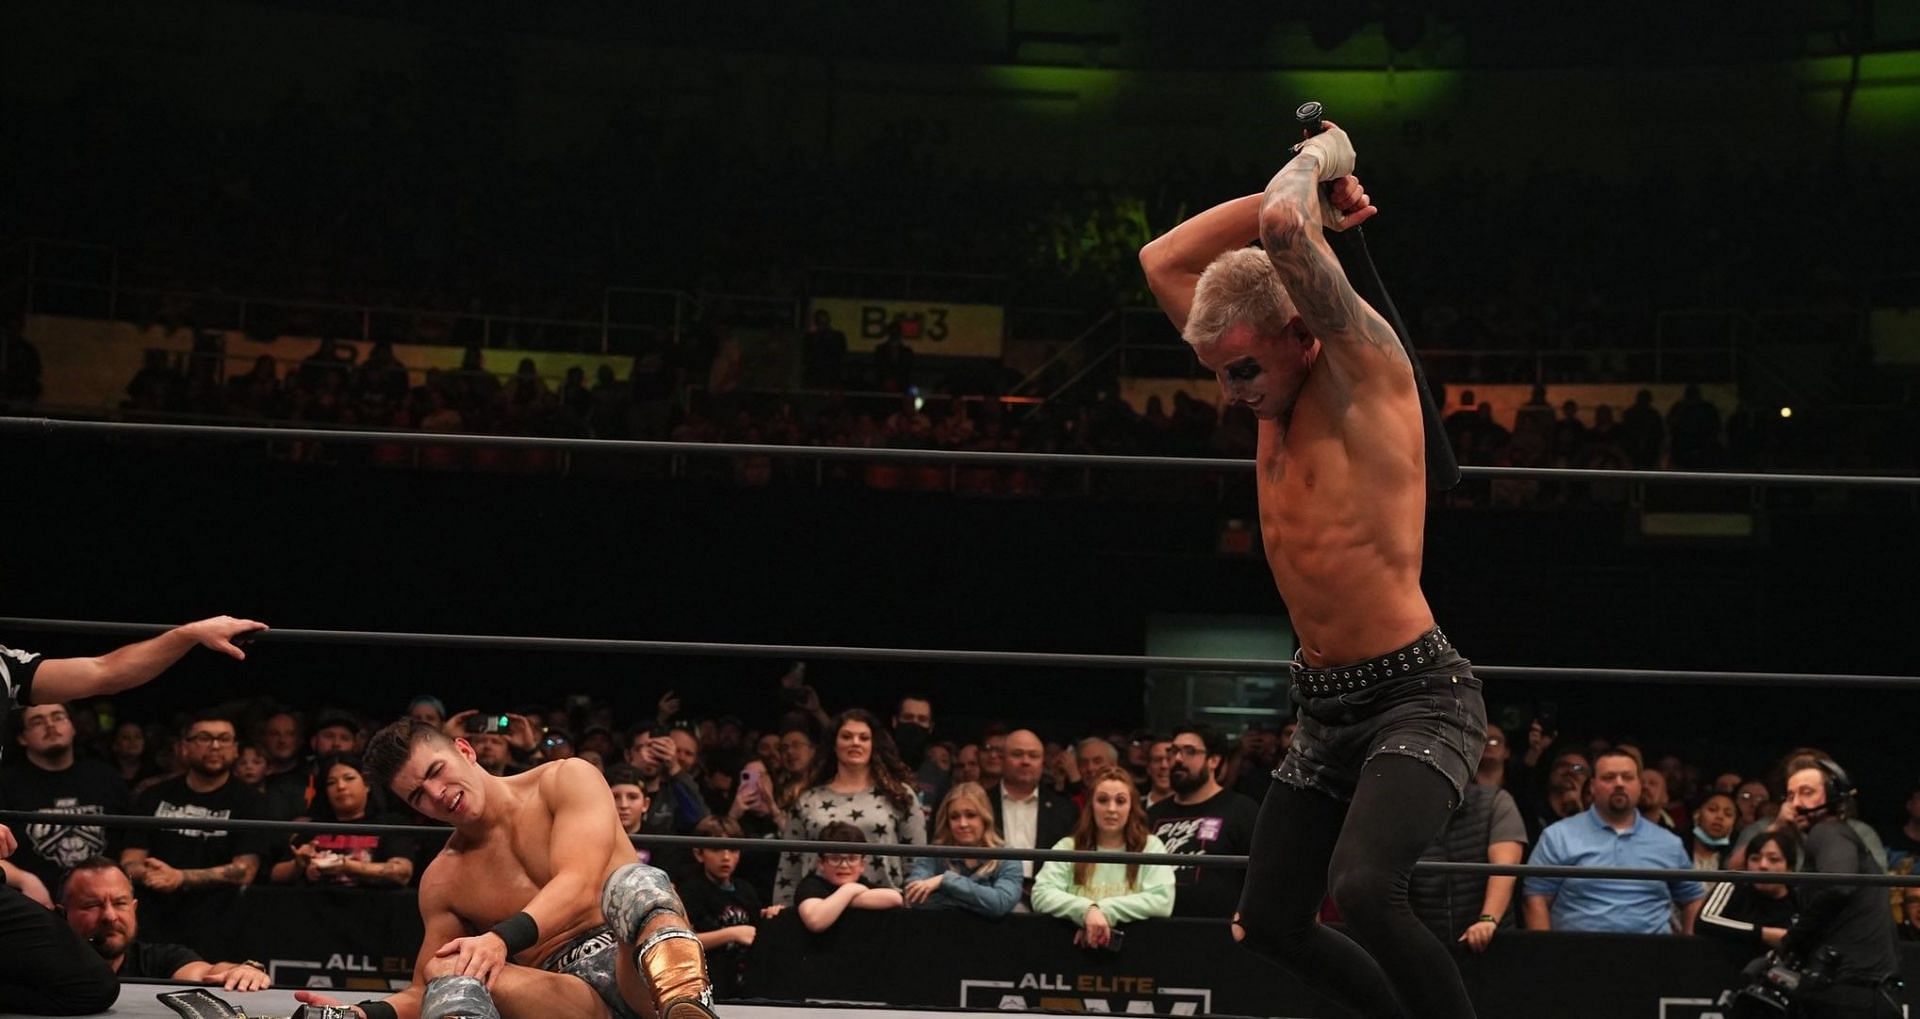 Sammy Guevara vs. Darby Allin battled it out in the main event of AEW Dynamite.